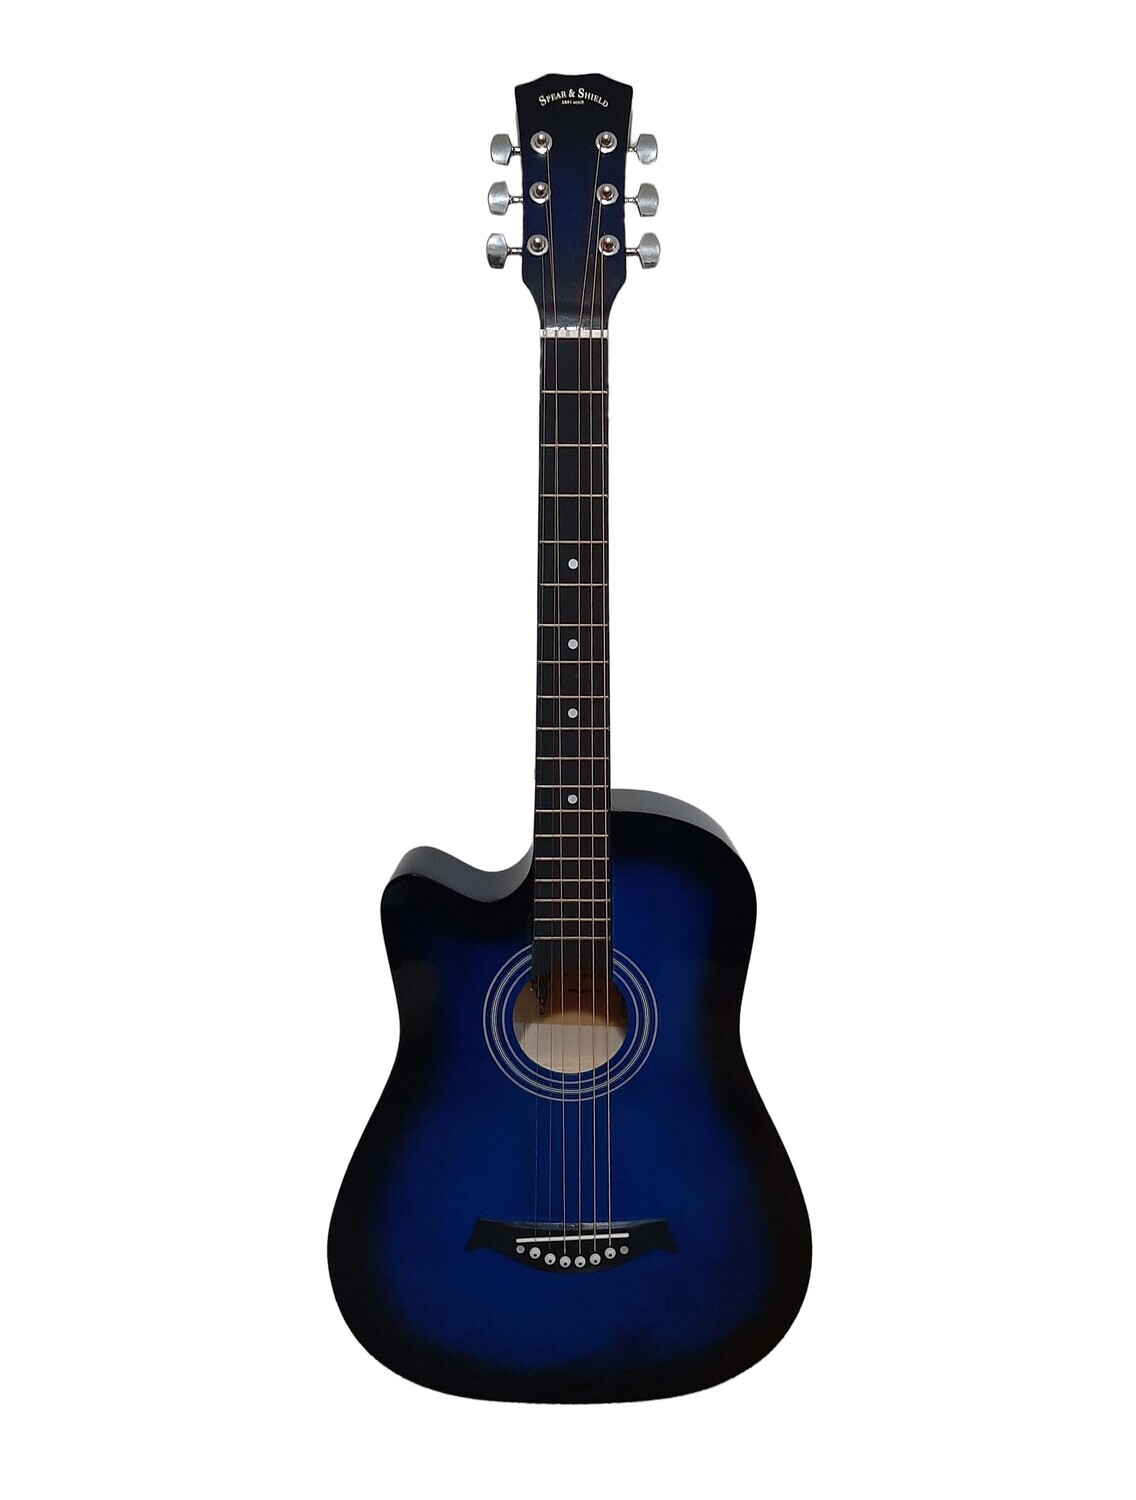 Spear & Shield Left-handed Acoustic guitar 38 inches for Children Beginners Small hand adults Blue SPS334LF